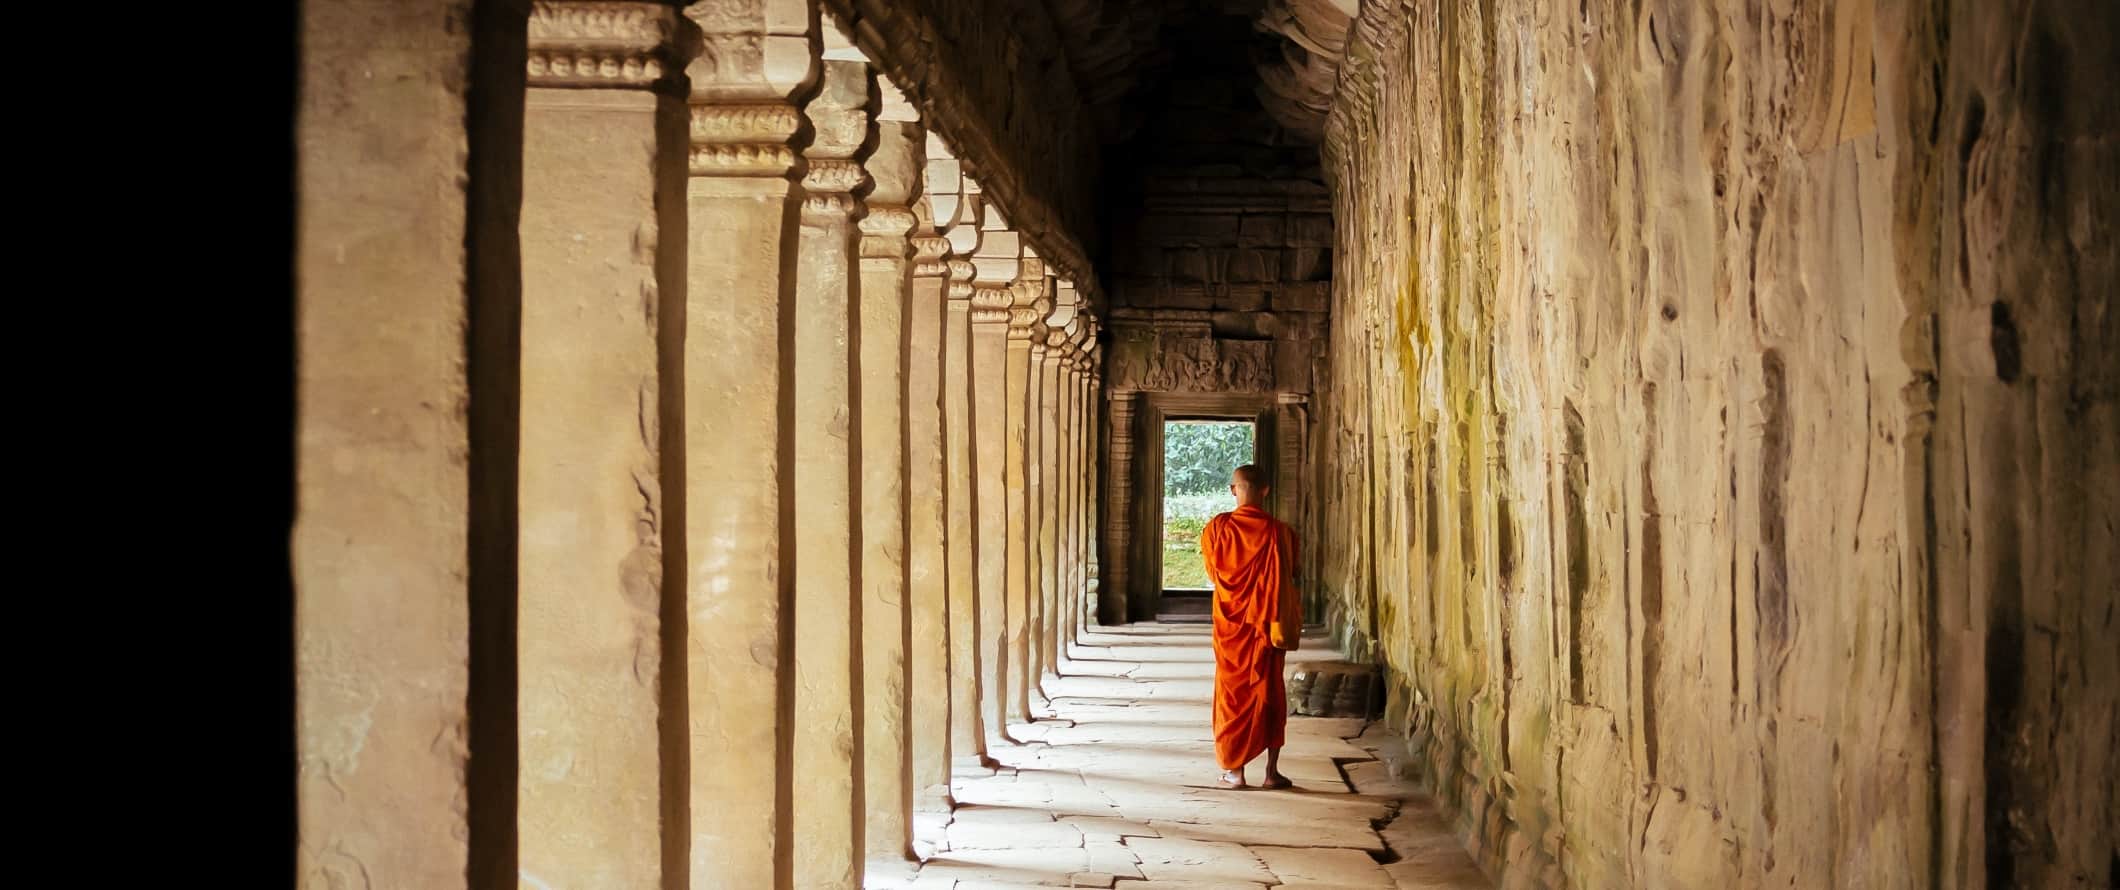 Monk in an orange robe walking down a temple's stone-lined walkway with stone pillars on one side at the Angkor Wat complex in Cambodia